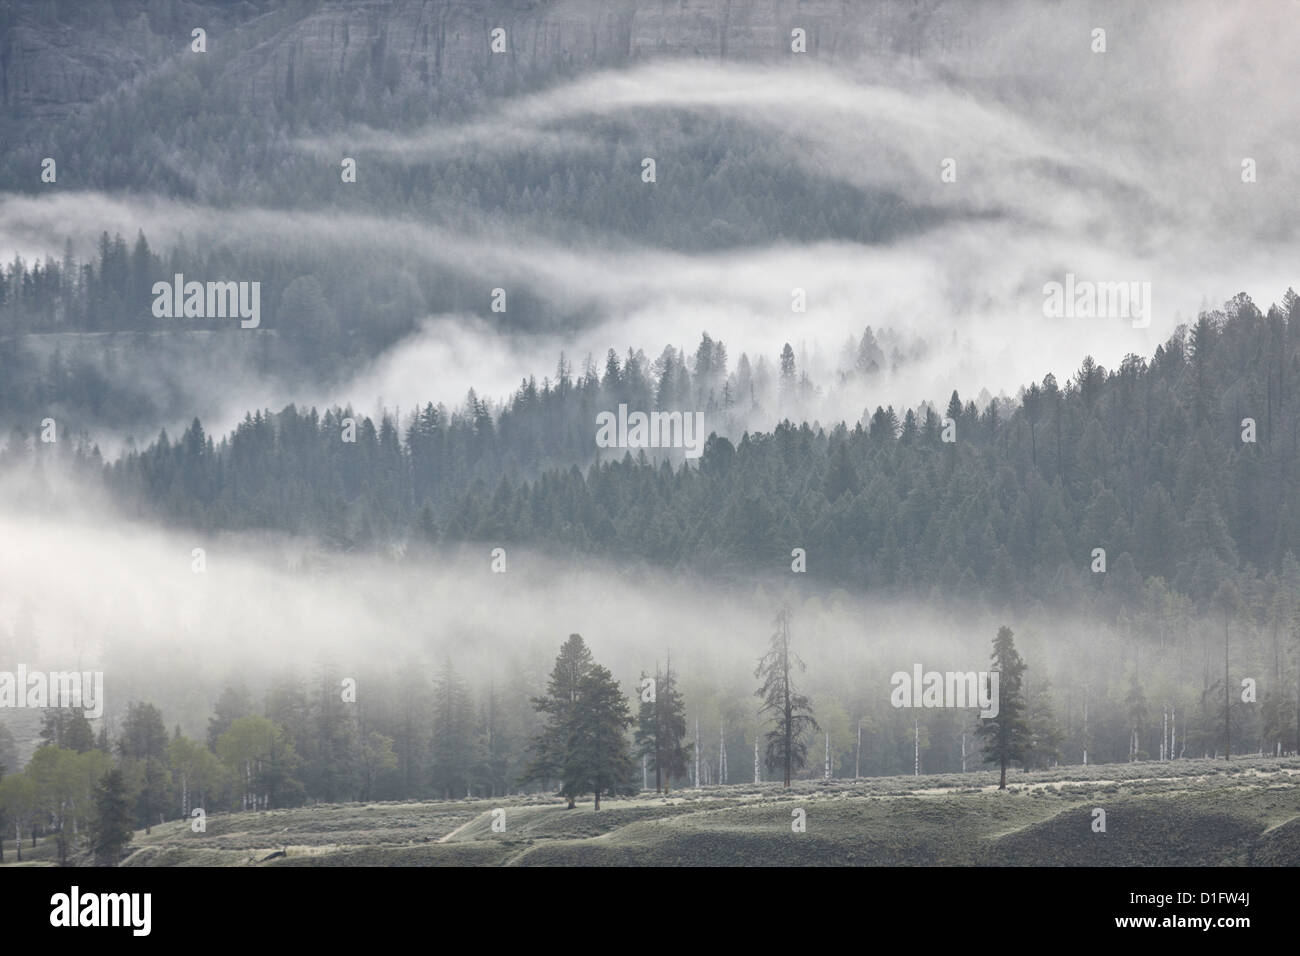 Fog mingling with evergreen trees, Yellowstone National Park, Wyoming, United States of America, North America Stock Photo